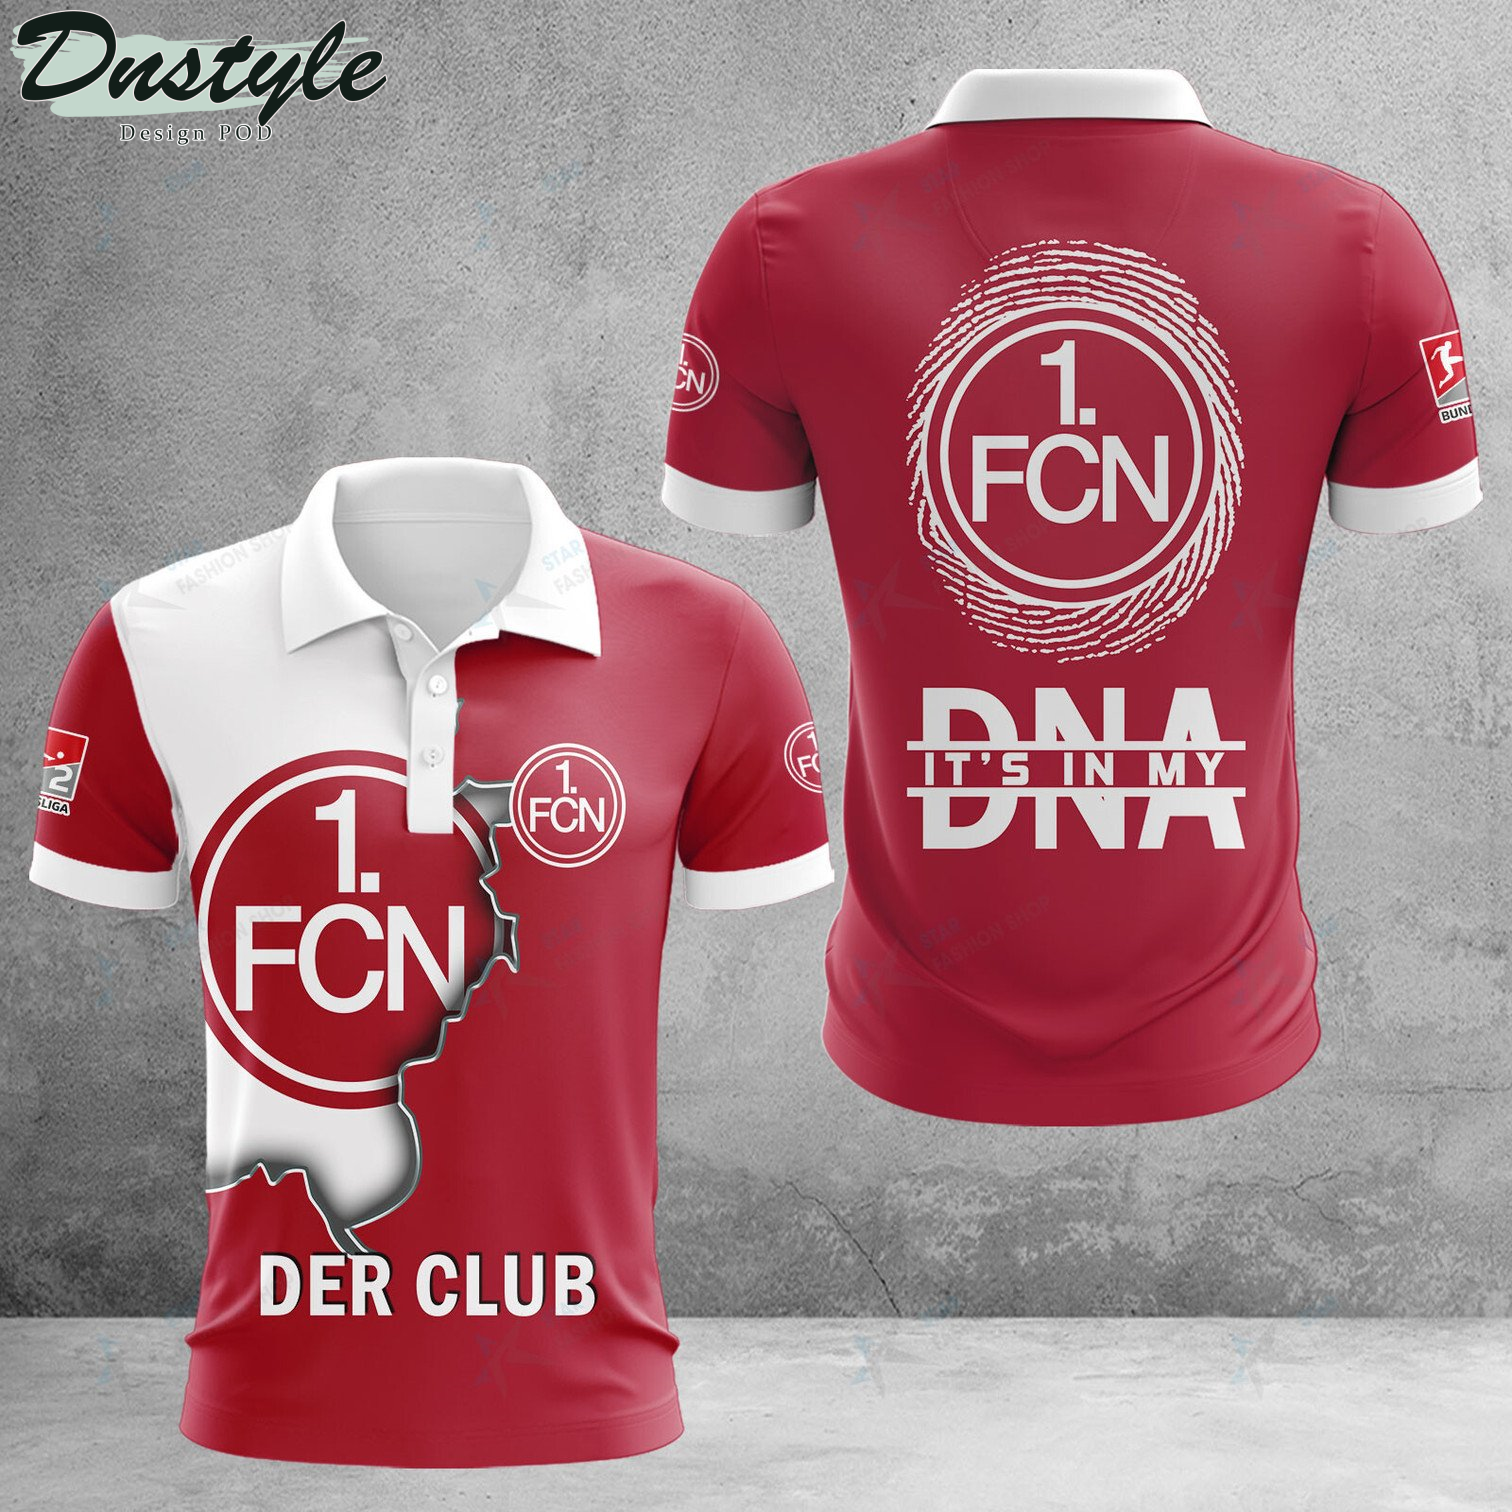 1. FC Nurnberg it's in my DNA polo shirt